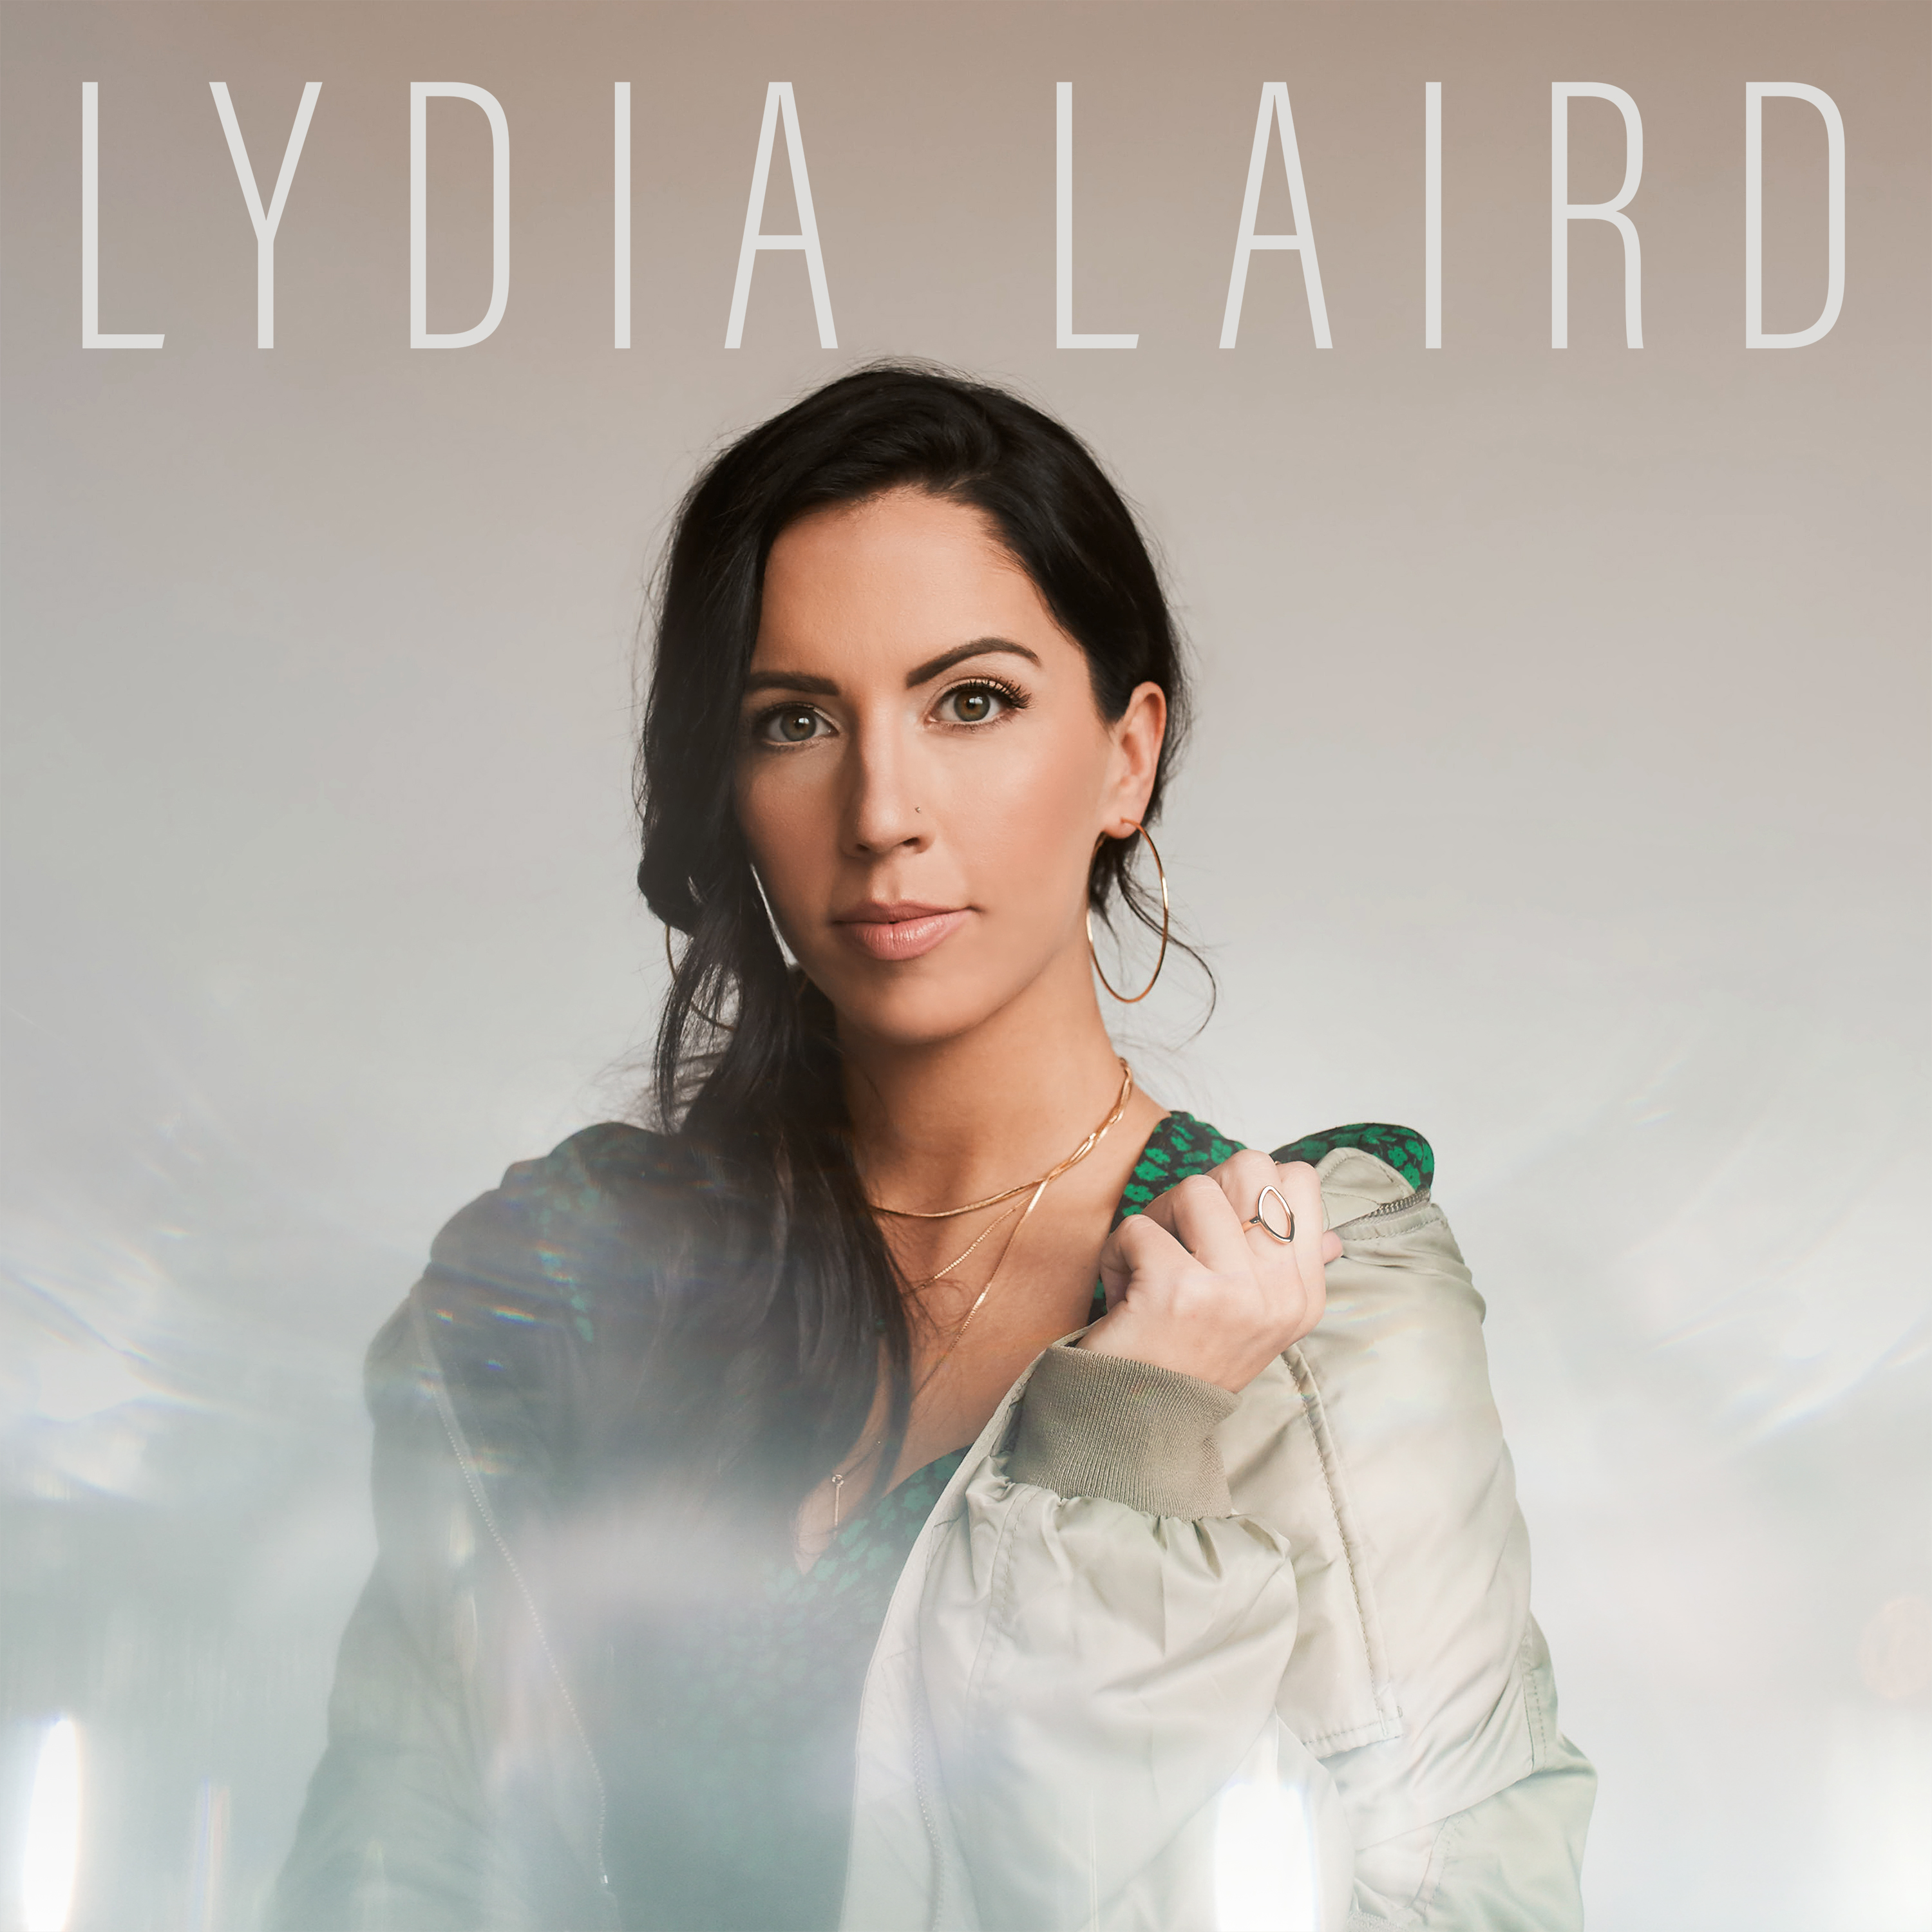 Songwriter & Vocalist LYDIA LAIRD Releases Self-Titled EP with Unique Social Media Campaign post image